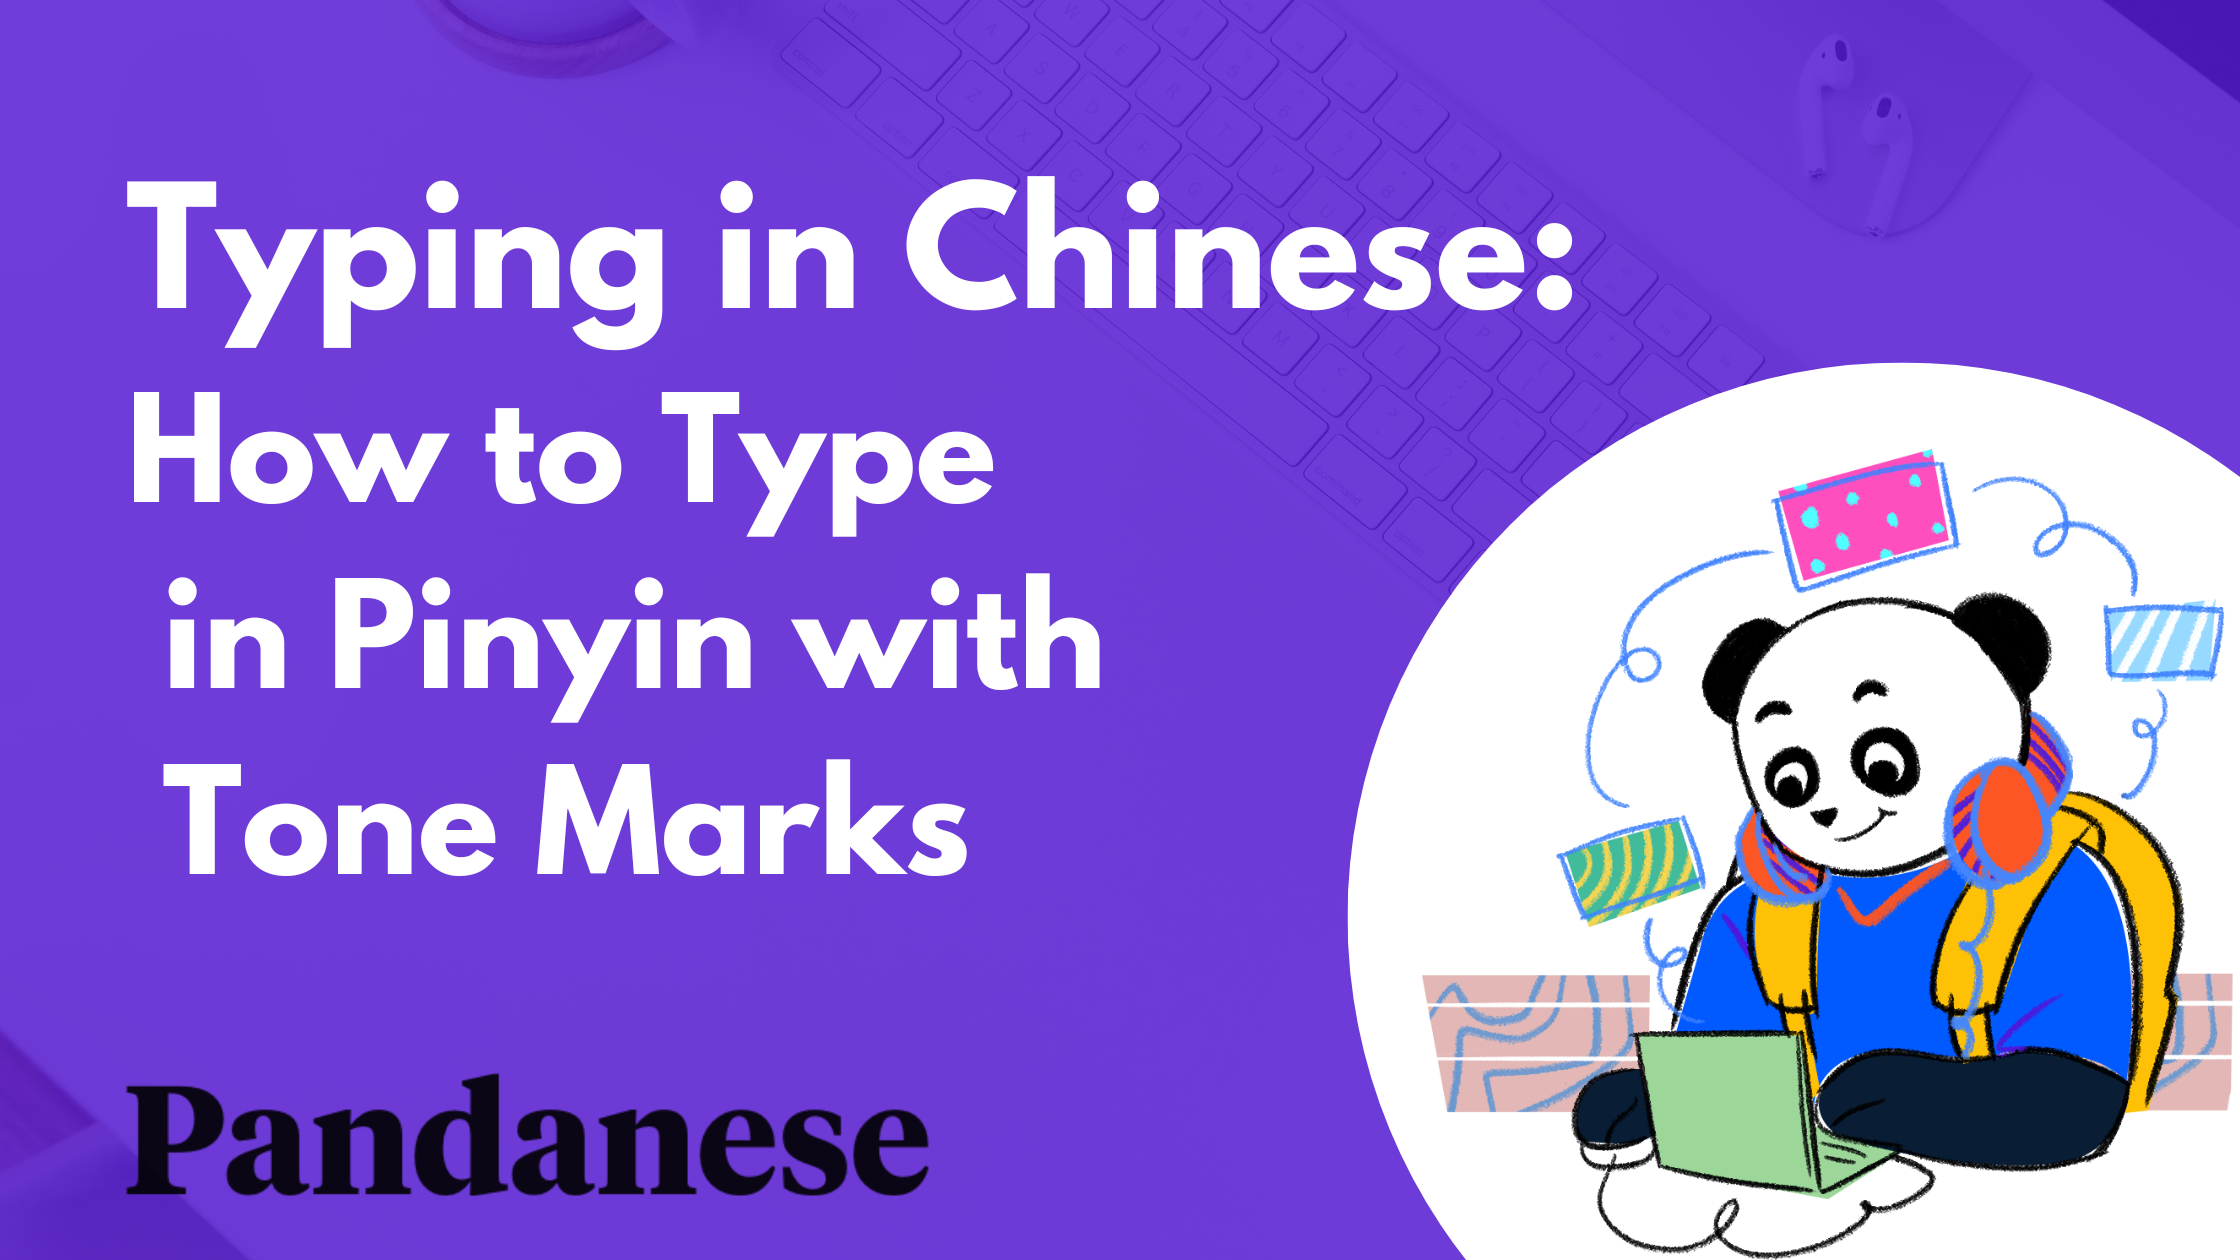 Type in Chinese: How to Type in Pinyin with Tone Marks